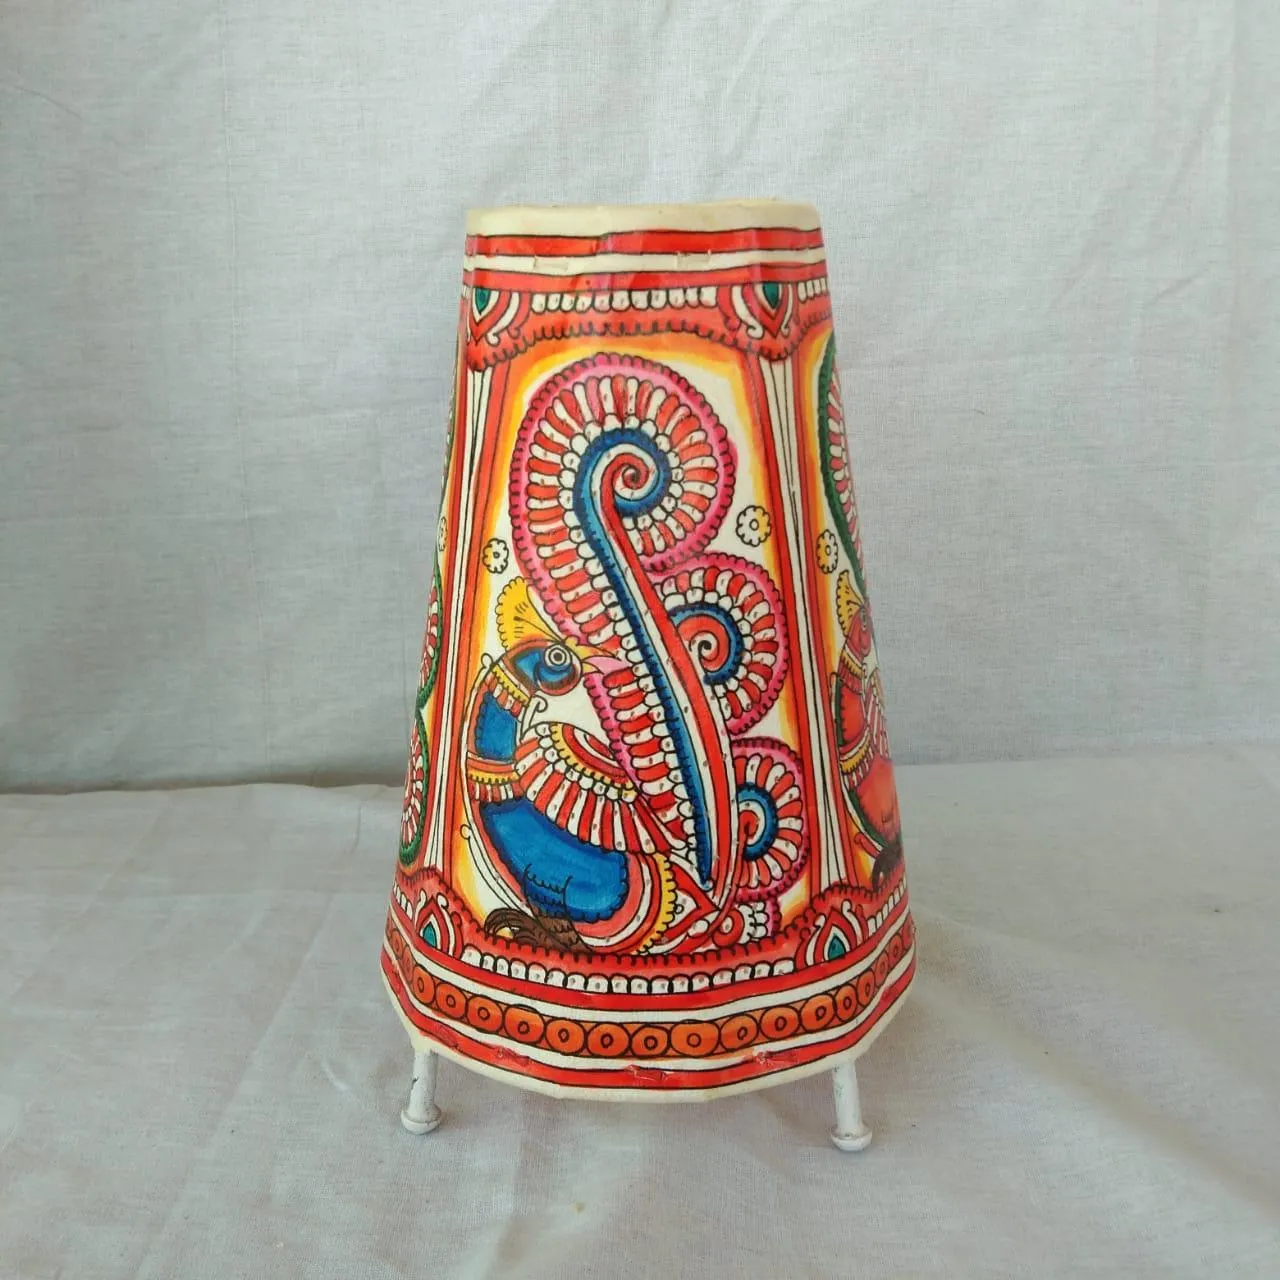 Handpainted colourful  table lamp.
Made of transparent leather.
Handcrafted alternative to a normal table lamp, upholding India’s heritage.